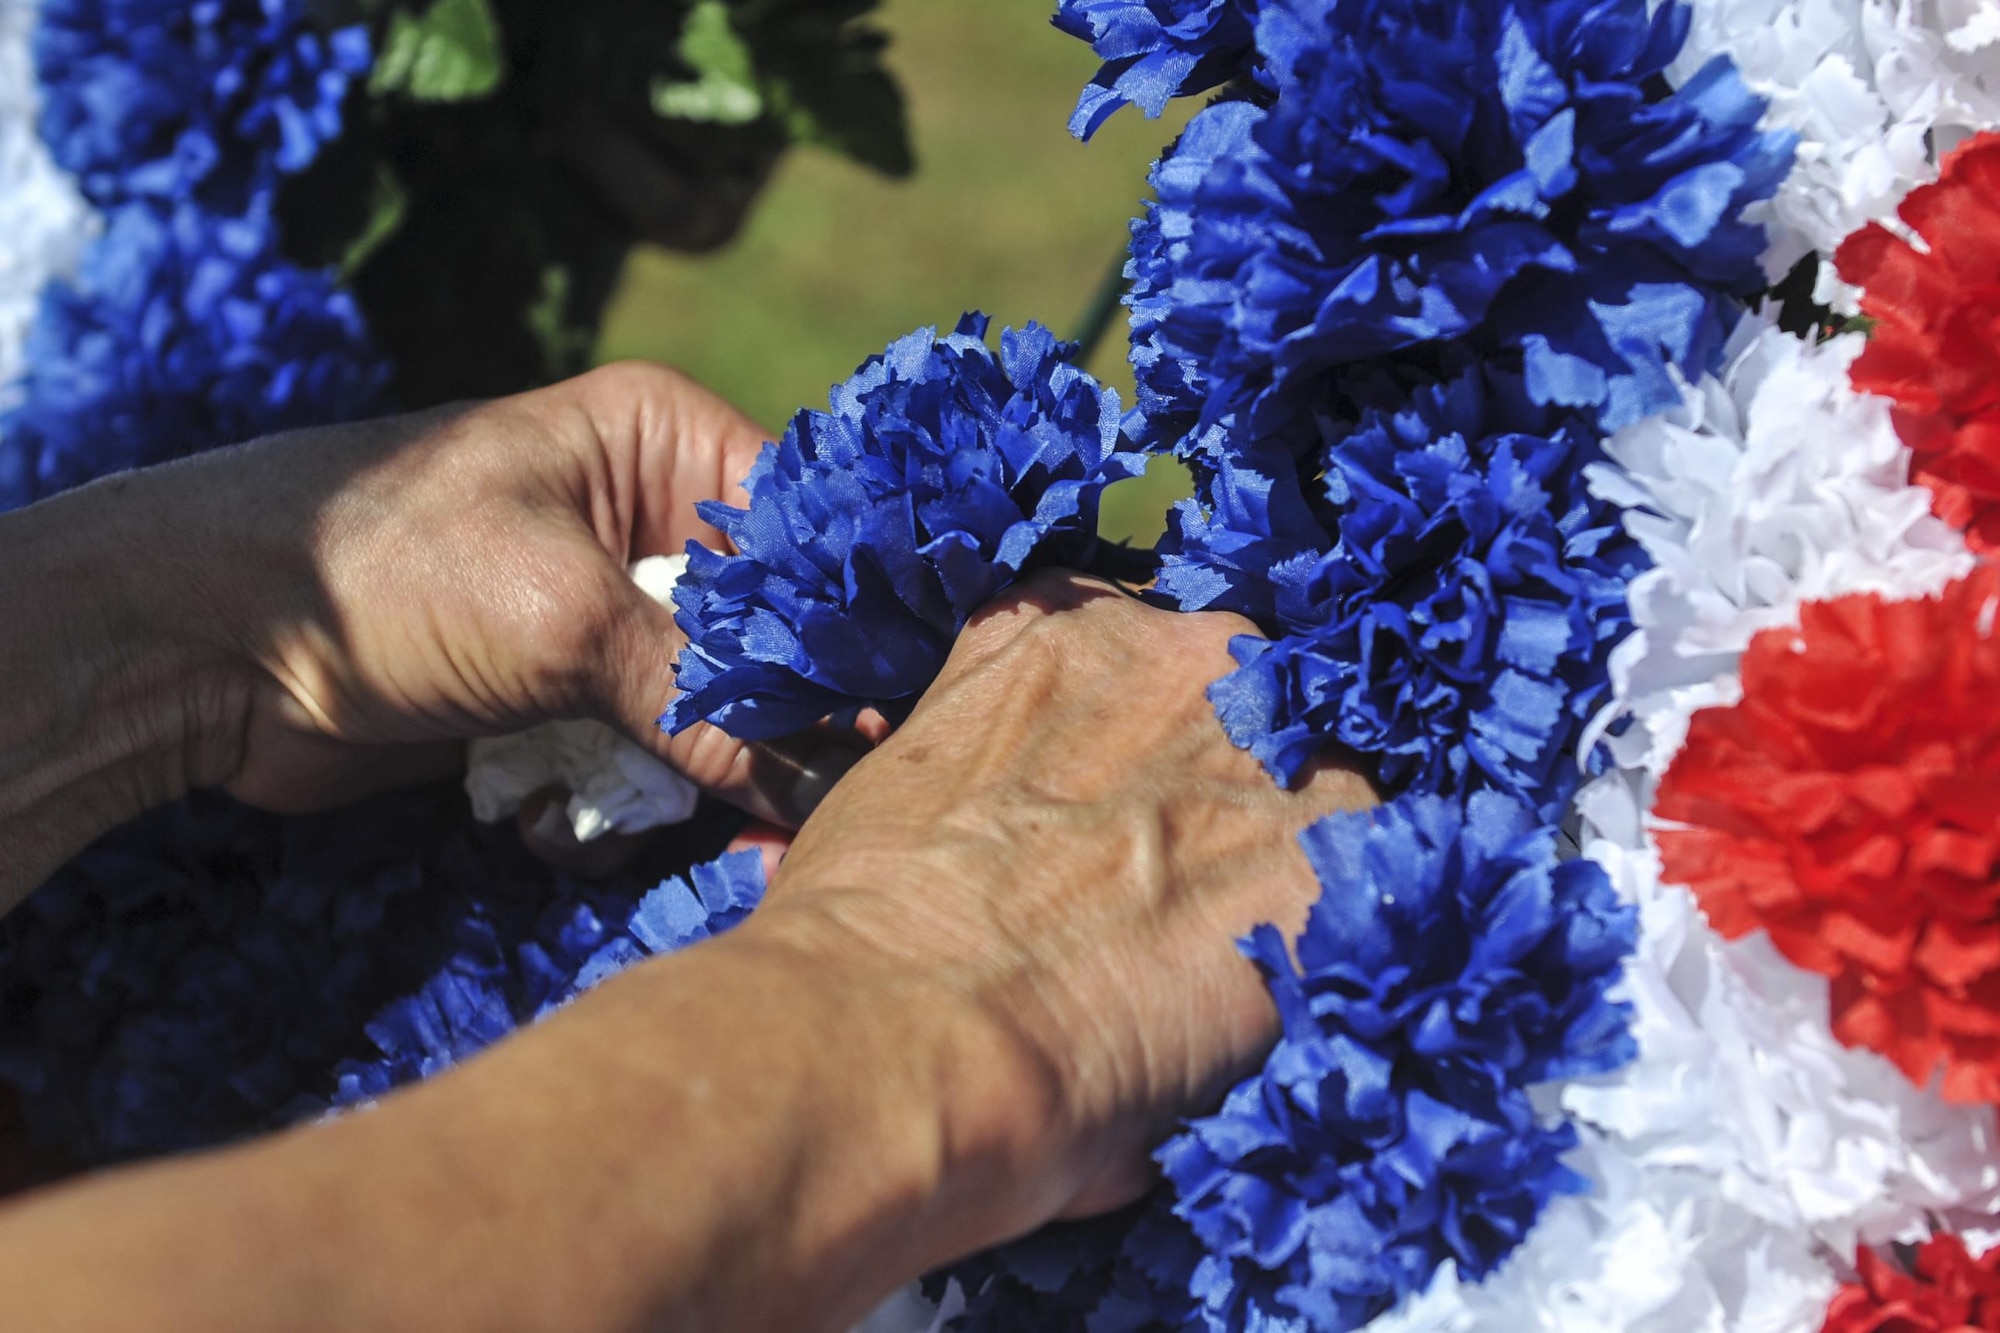 A family member of the AC-47 Spooky Gunship Brotherhood puts a flower on a wreath in remembrance of a fallen loved one during a plaque dedication ceremony at the Hurlburt Field Air Park, Fla., Sept. 9, 2016. The Spooky brotherhood purchased a memorial plaque with the names of fallen AC-47 crewmembers, who served in Southeast Asia. (U.S. Air Force photo by Airman Dennis Spain)